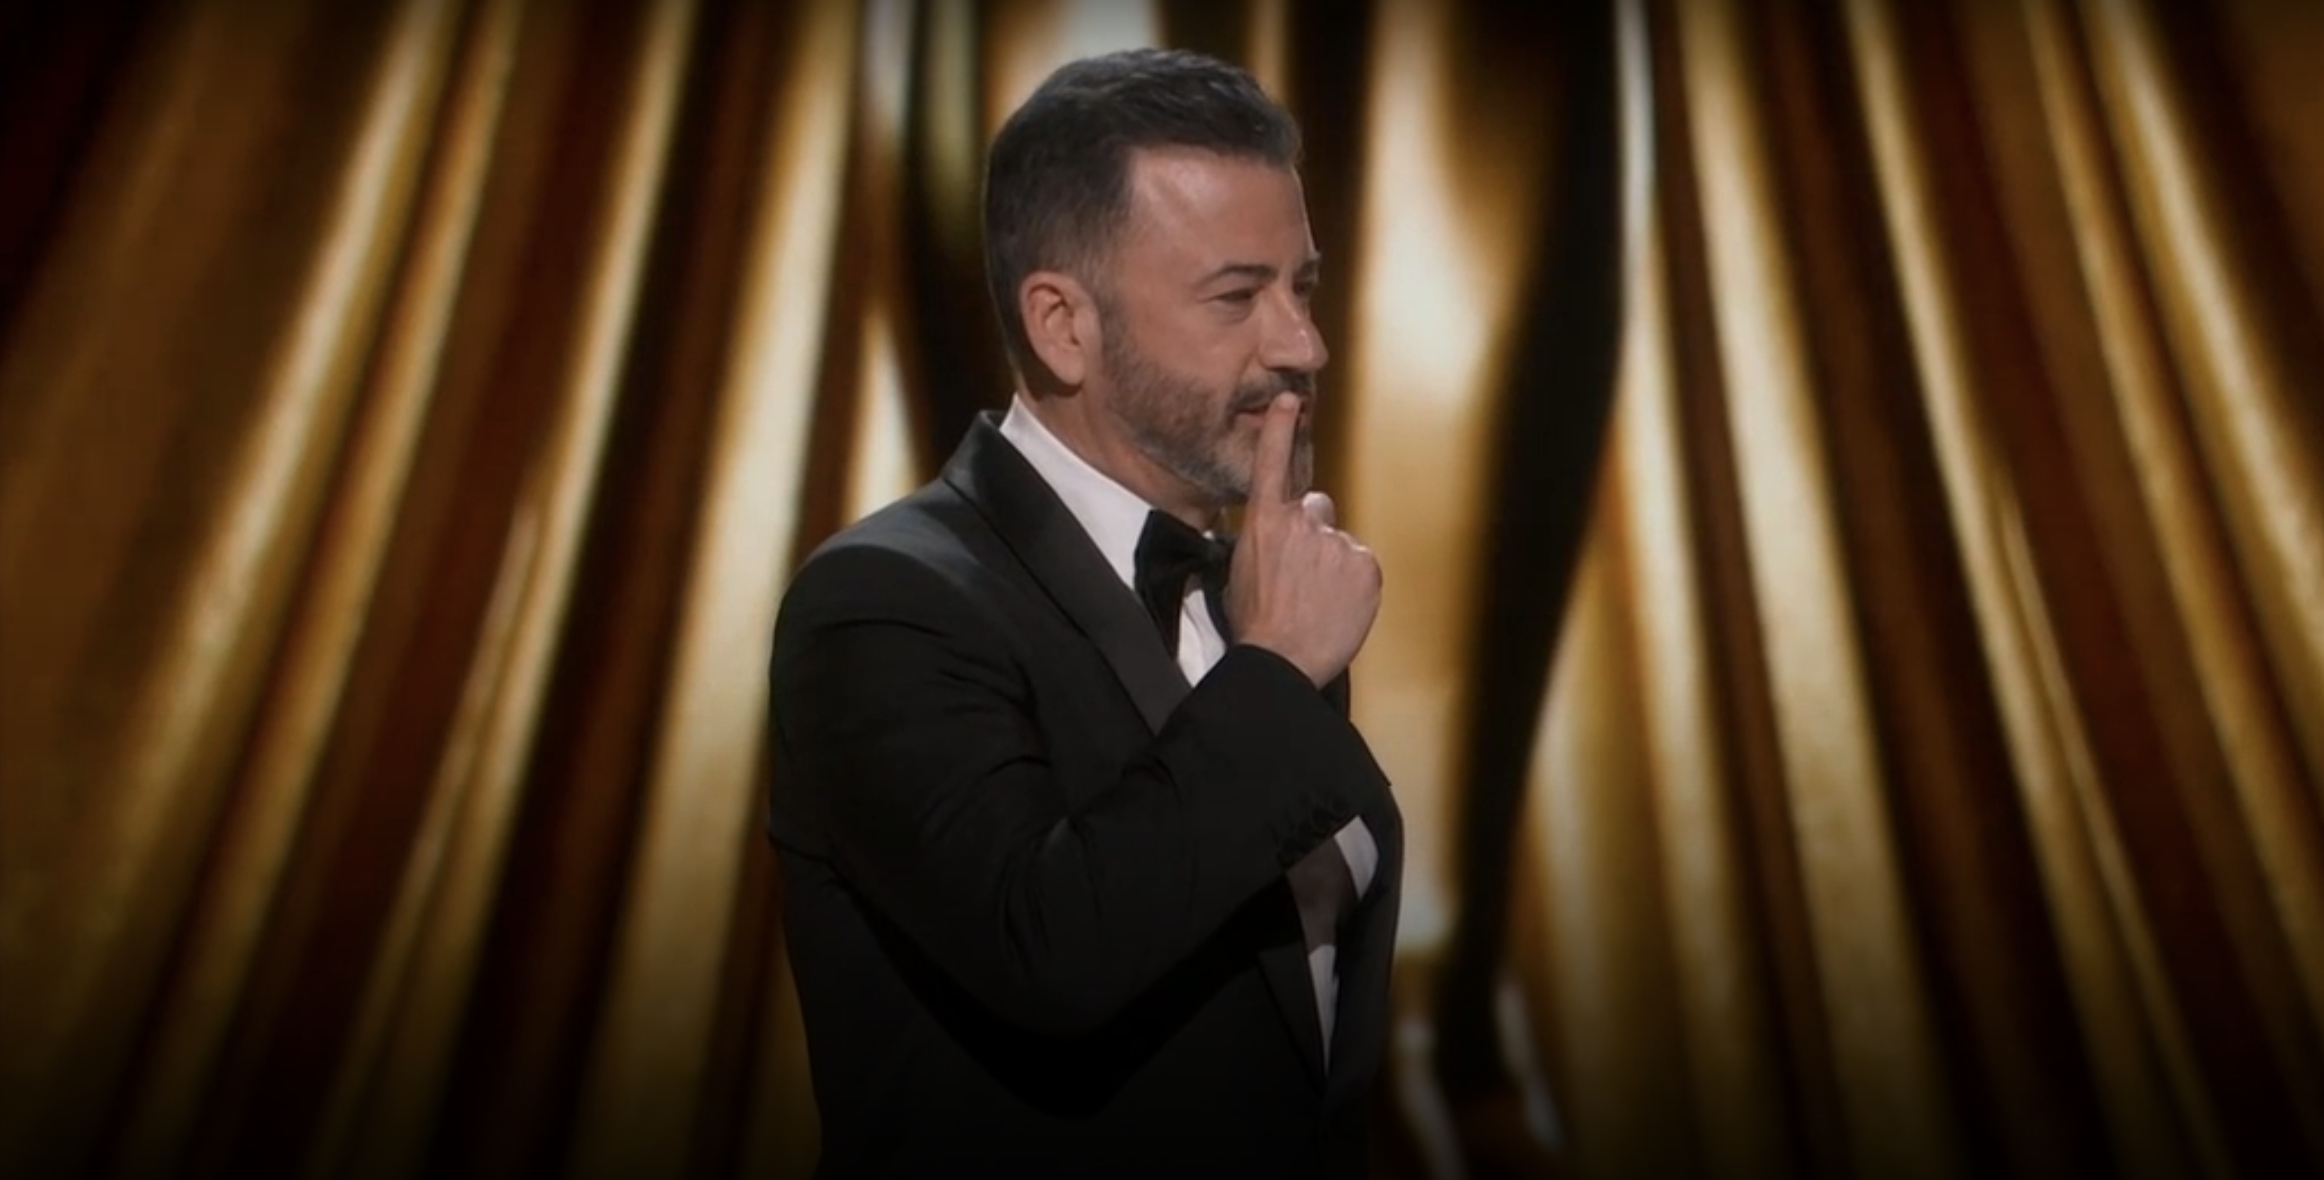 Jimmy Kimmel in a tuxedo hosting on stage with a thoughtful expression, finger on chin